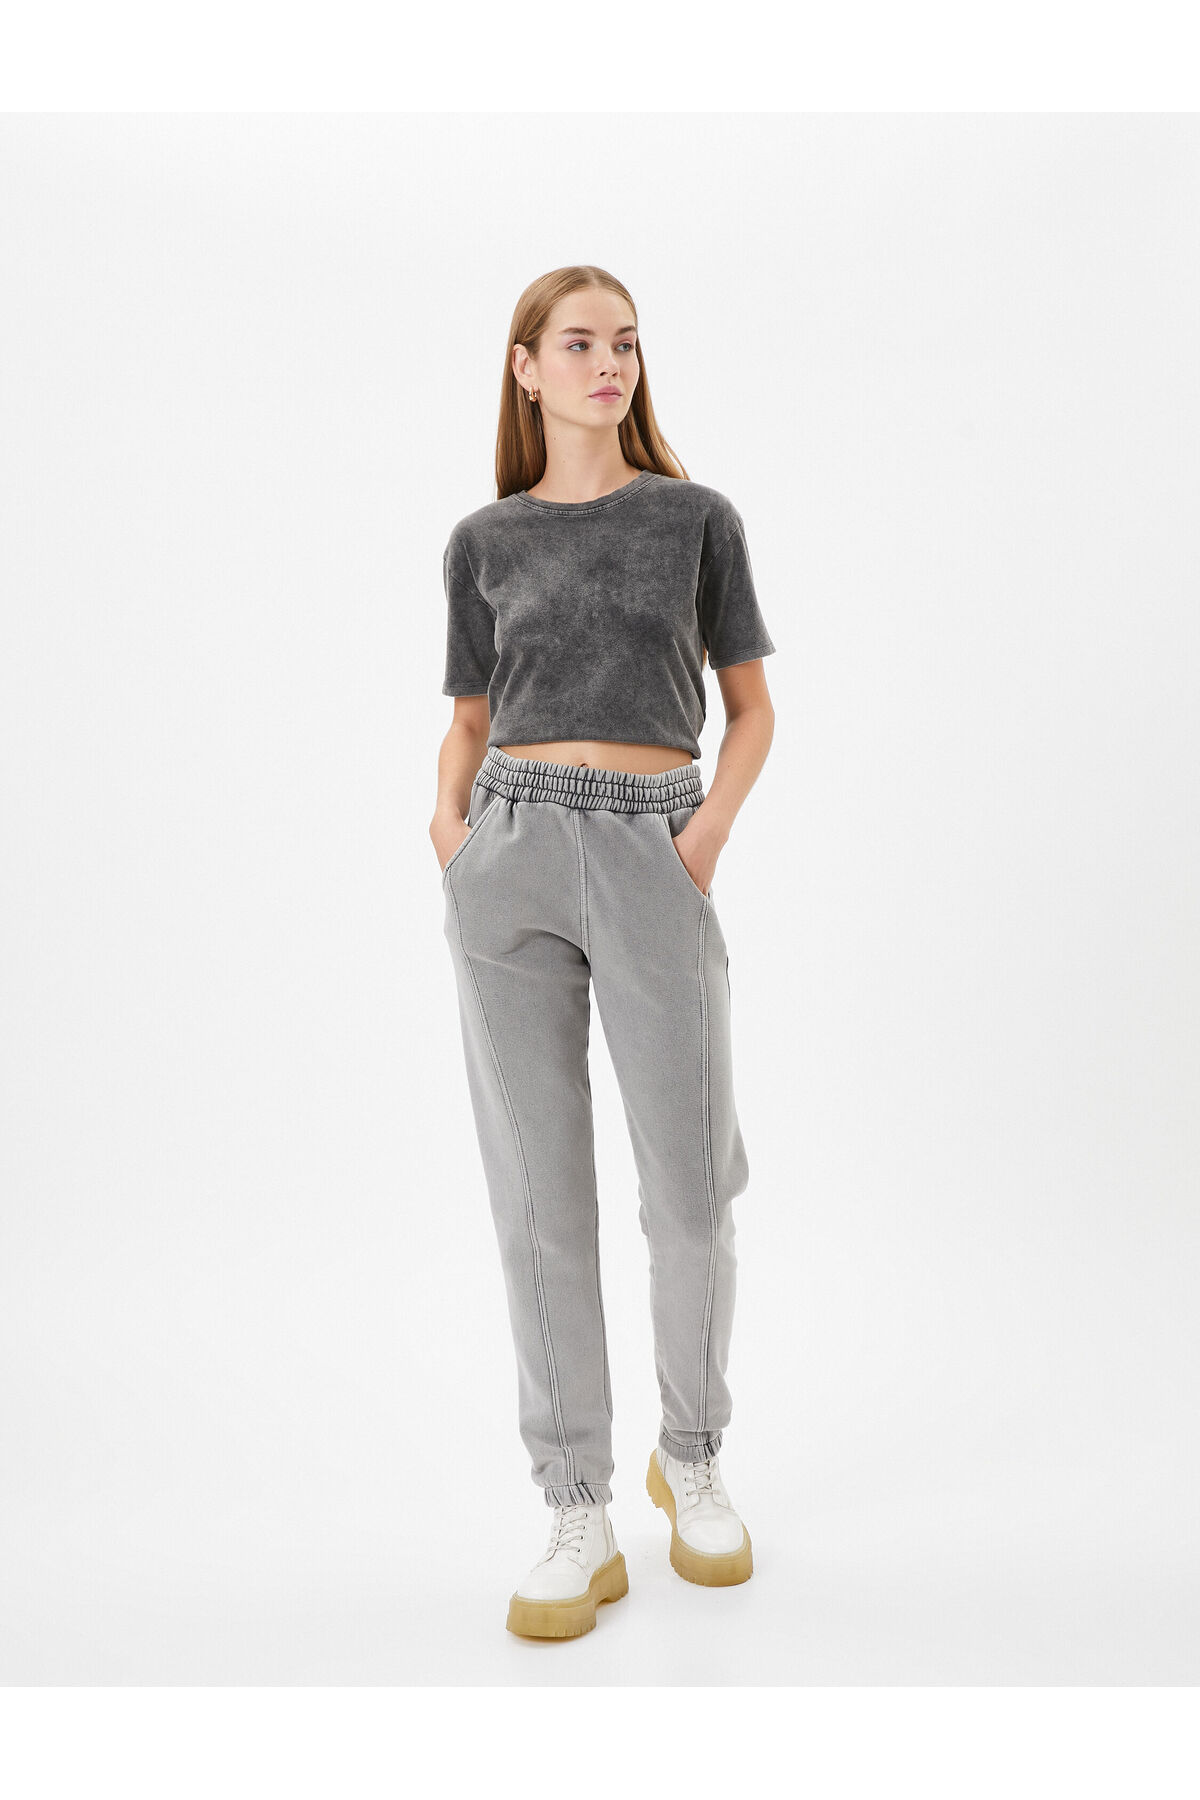 Koton Jogger Sweatpants Faded Effect High Waist with Pockets. Comfortable Fit. Cotton.